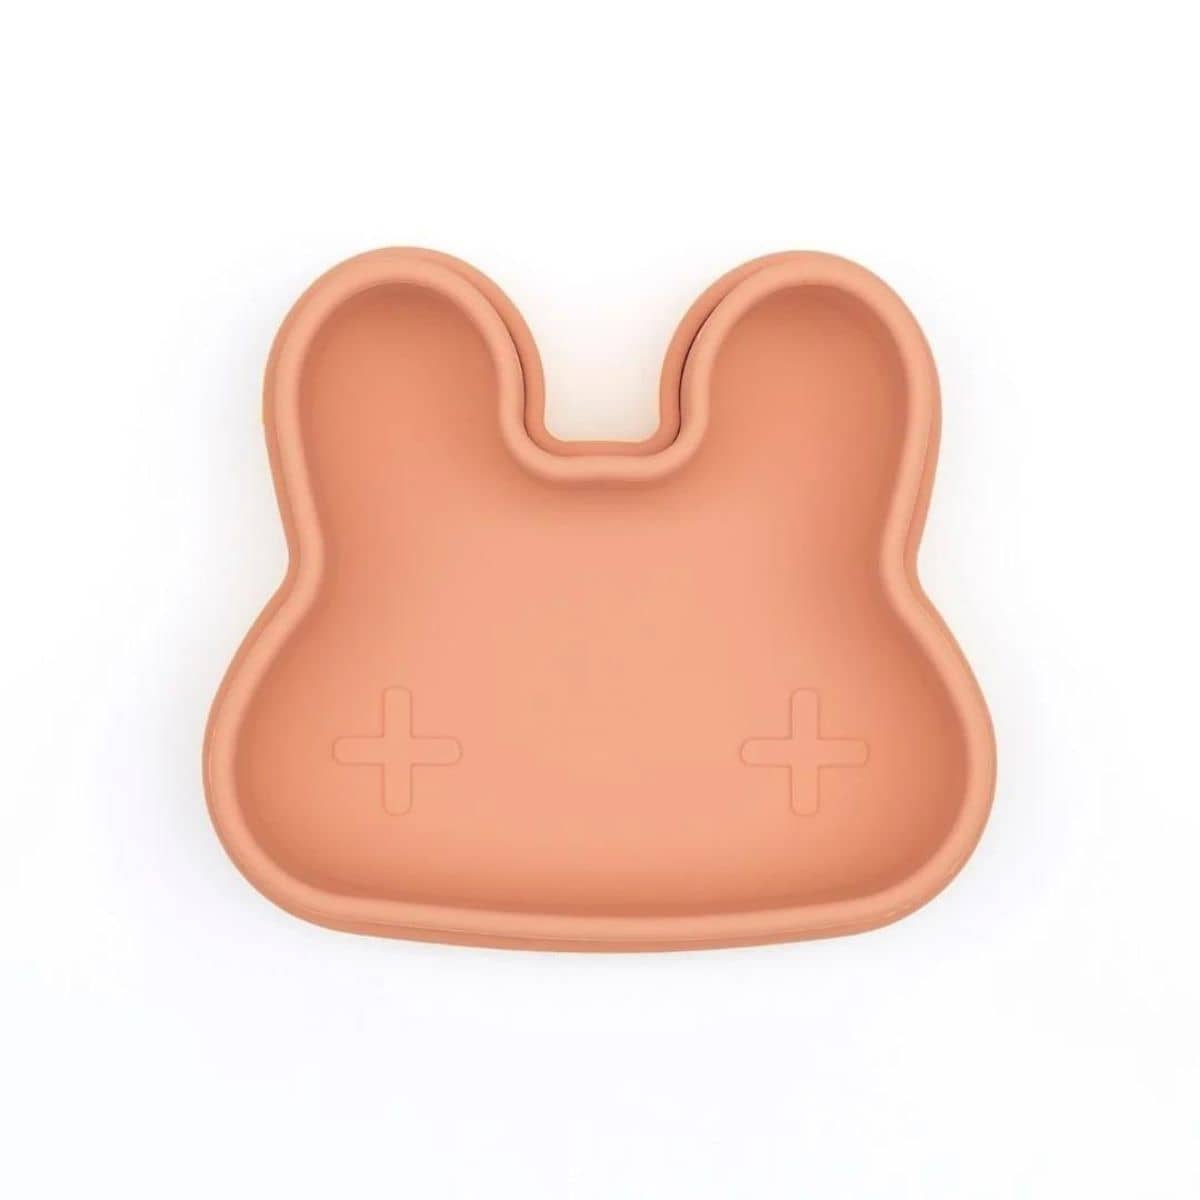 We Might Be Tiny Snackie Silicone Bowl + Plate - Bunny - Dark Peach